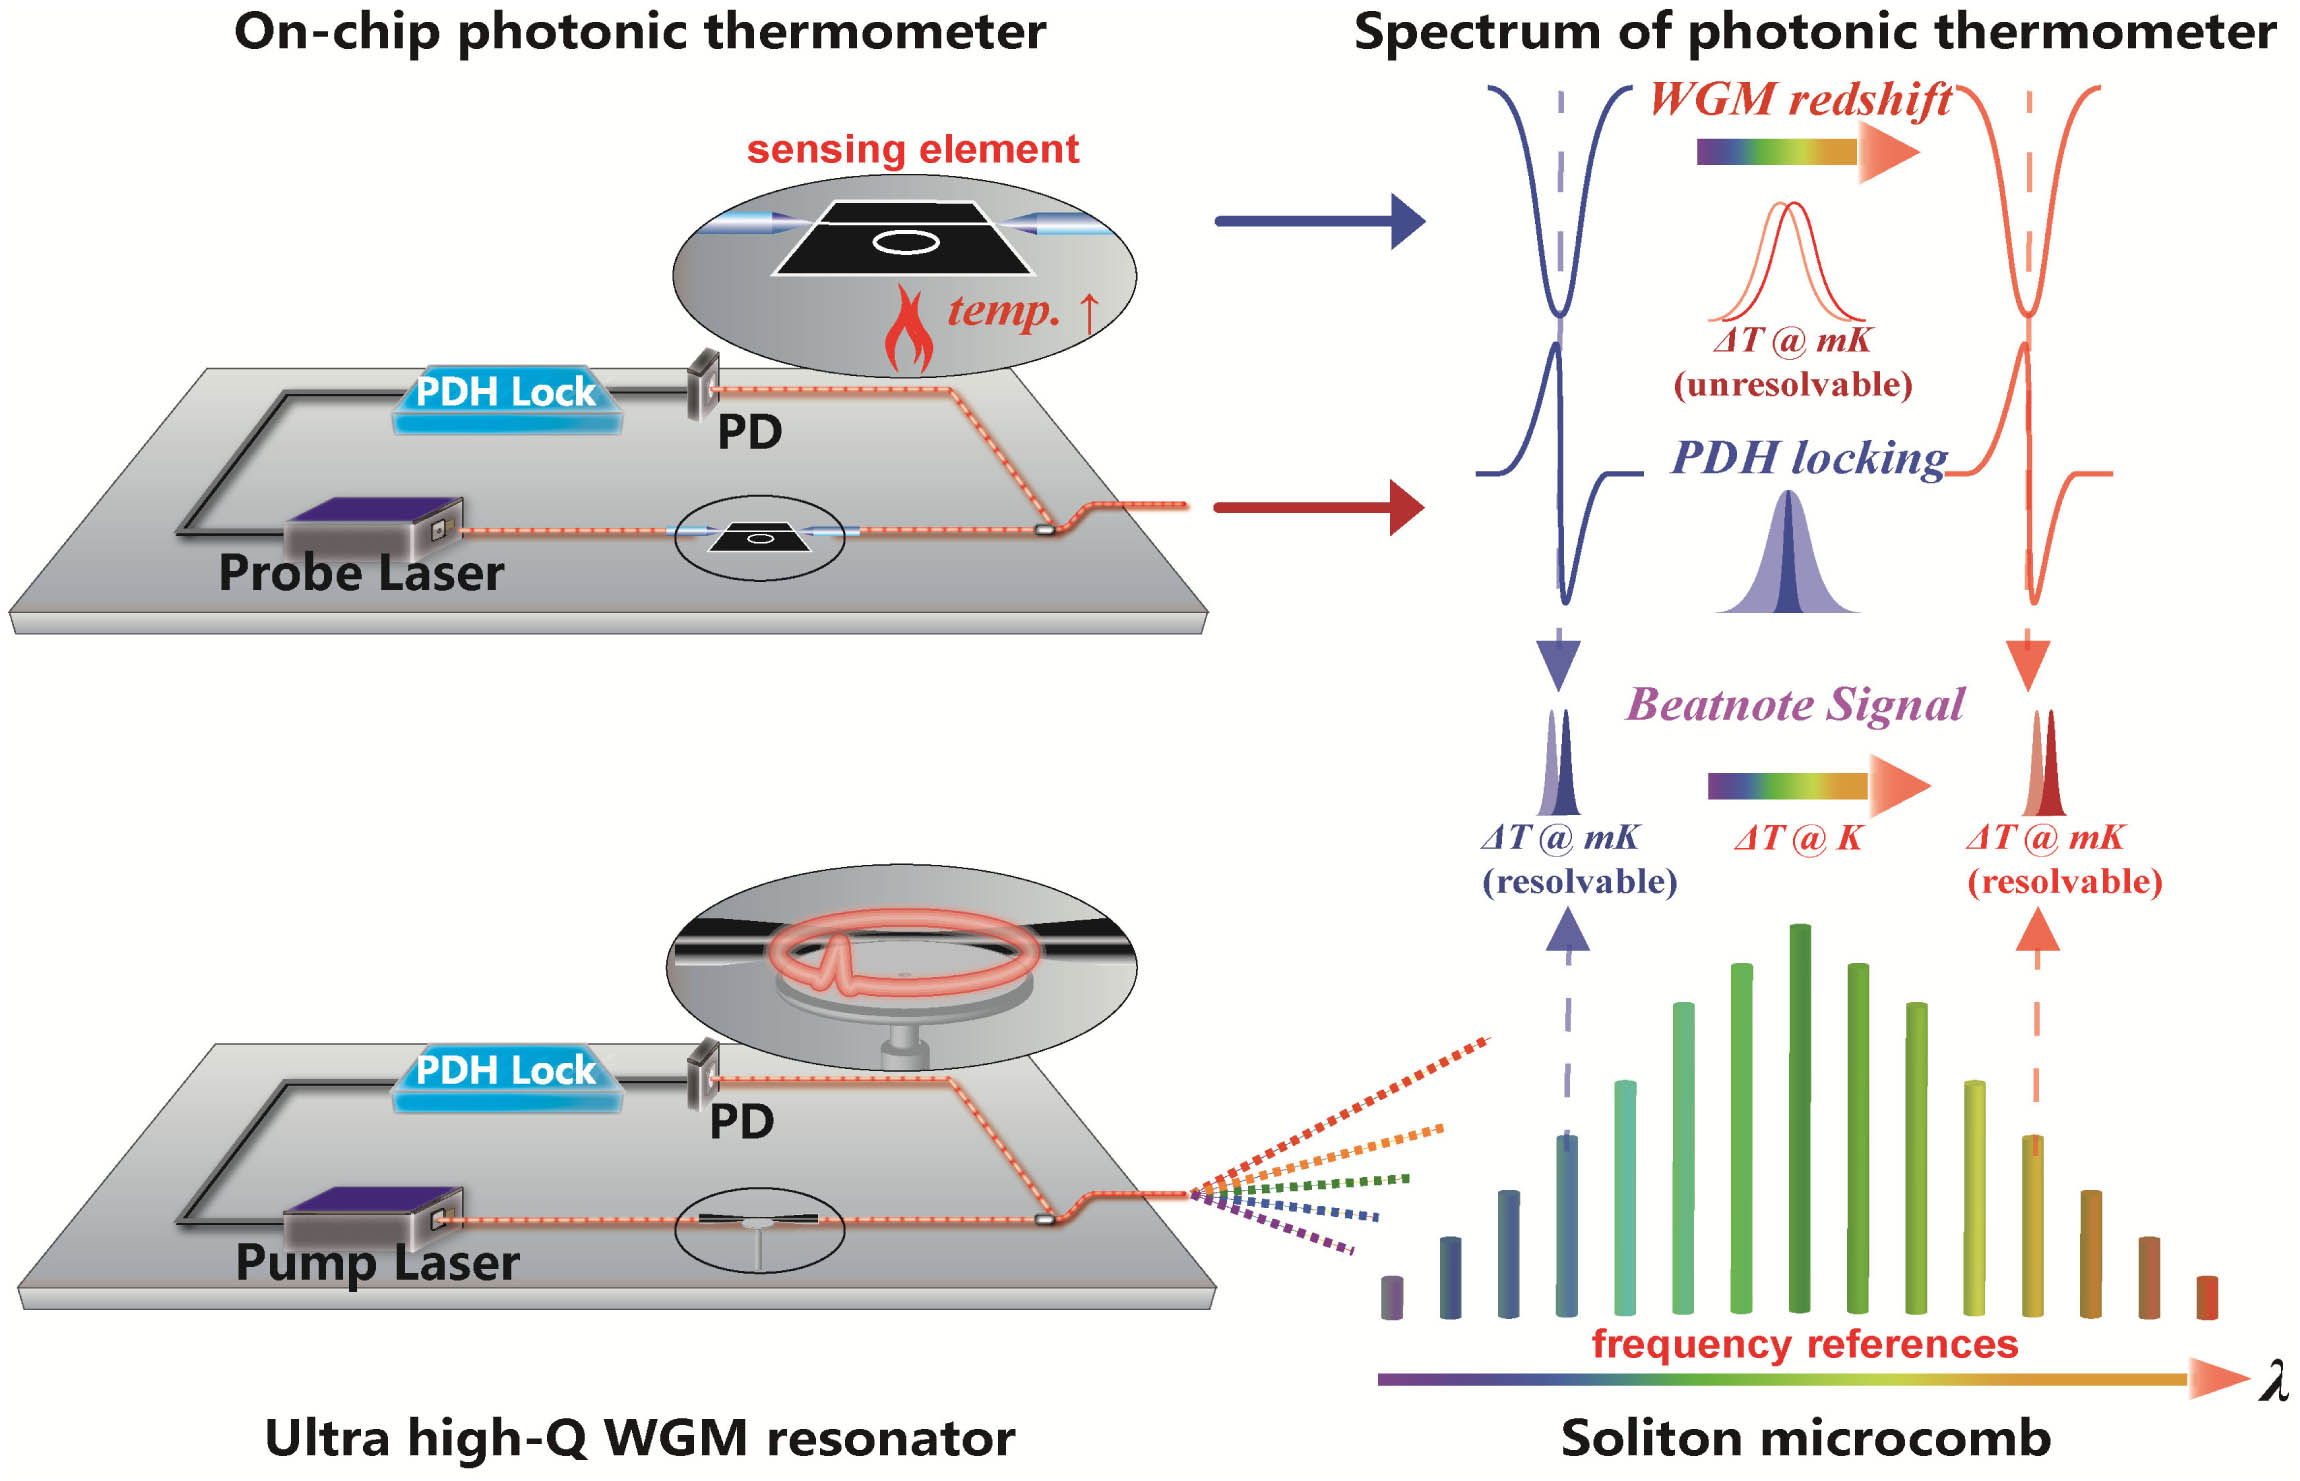 Concept of the microcomb-assisted ultra-high-resolution and broad-range WGM photonic thermometer. The sensing element is an on-chip microring WGMR, which generates WGM red shift with increasing temperature (positive thermo-optic coefficient). The PDH locking ensures linewidth reduction and tracking of the WGM. The soliton microcomb provides broadband frequency references, thereby ensuring a broad range. By combining PDH-locking microring with a soliton microcomb, the temperature sensing achieves ultra-high resolution and broad range.